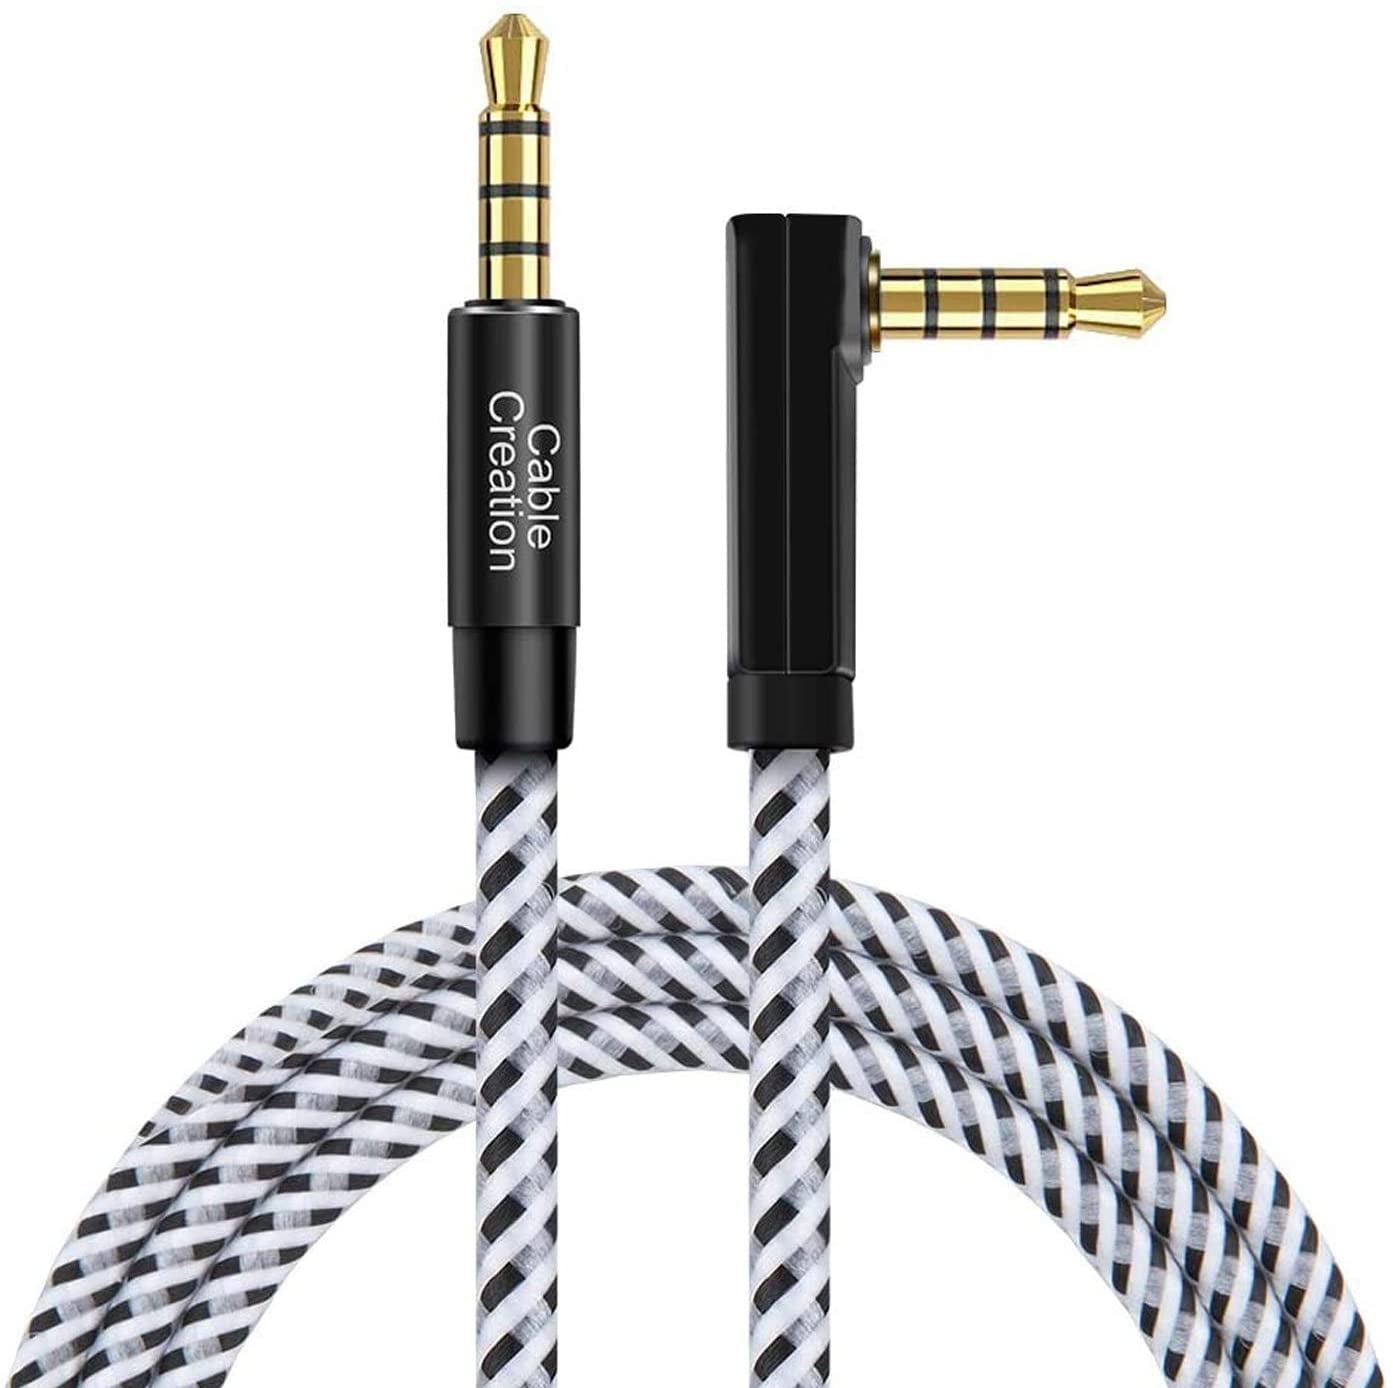 6FT Gold 3.5mm 4 Poles Stereo Right Angle Male to Male TRRS Audio Adapter Cable 